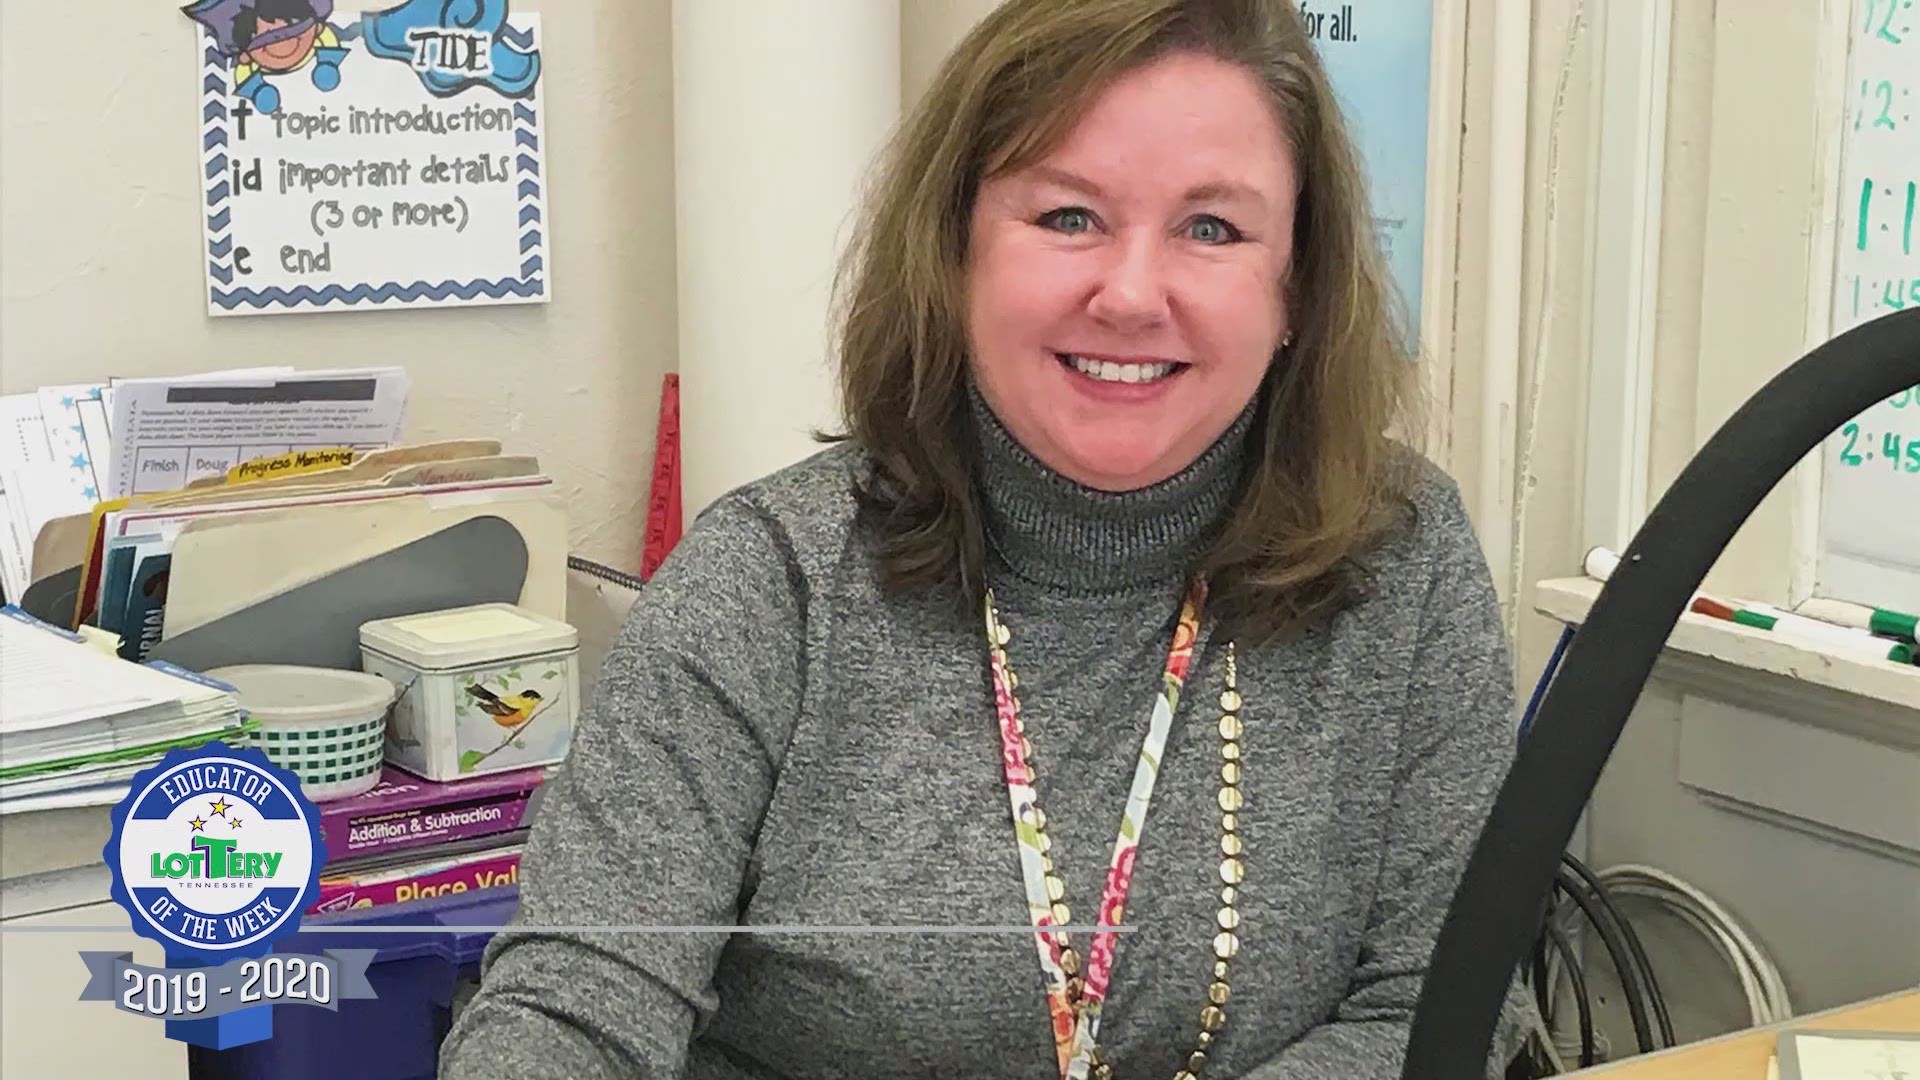 The Educator of the Week 3/9 is Laura Cain